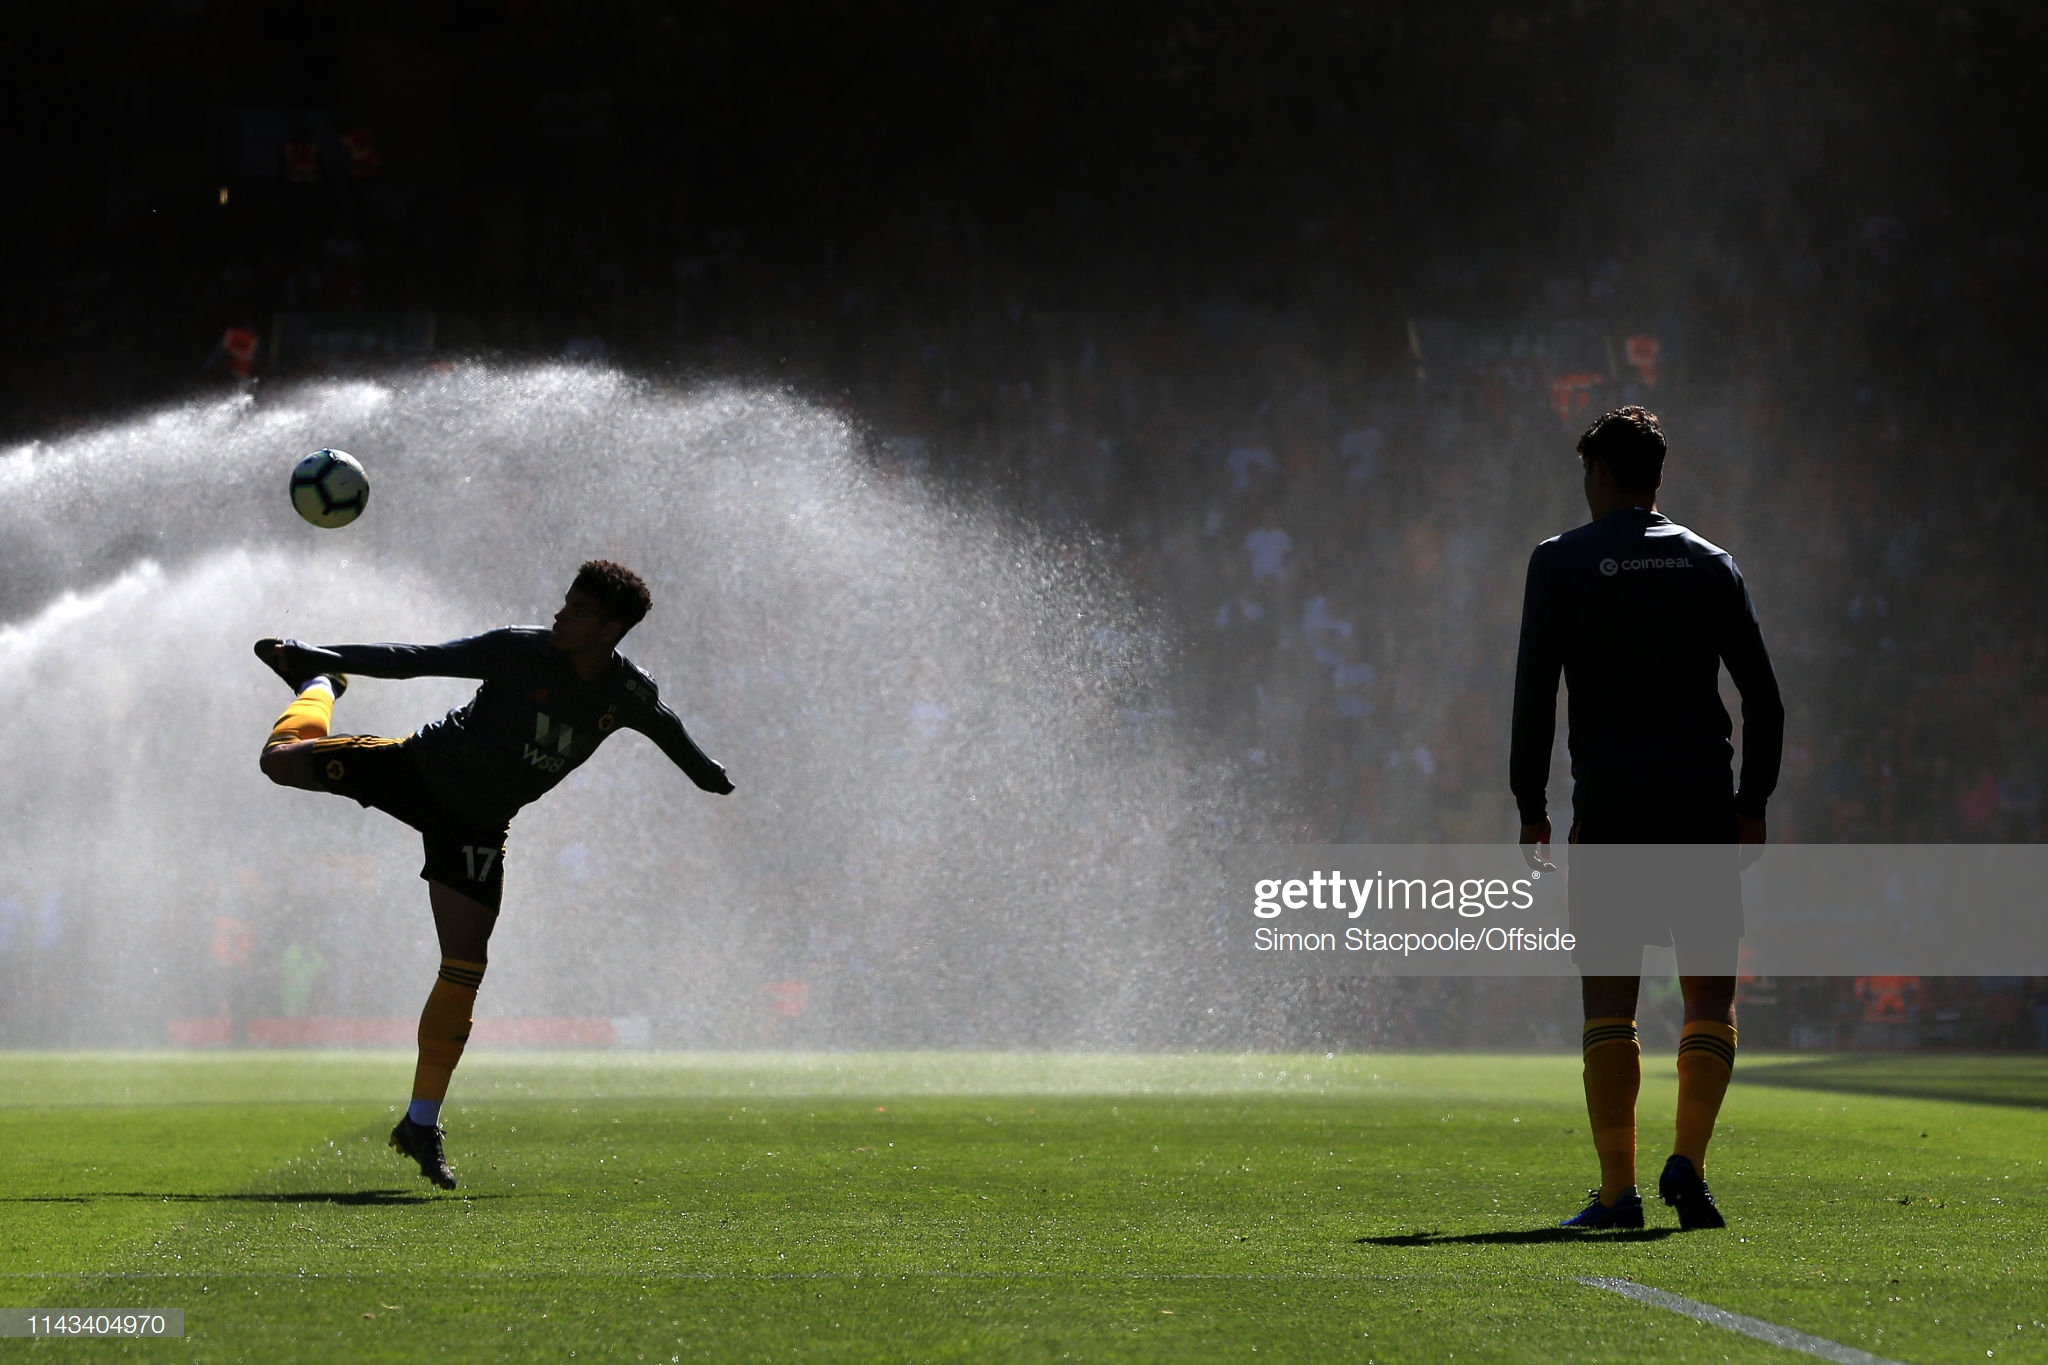 gettyimages-1143404970-2048x2048.jpg